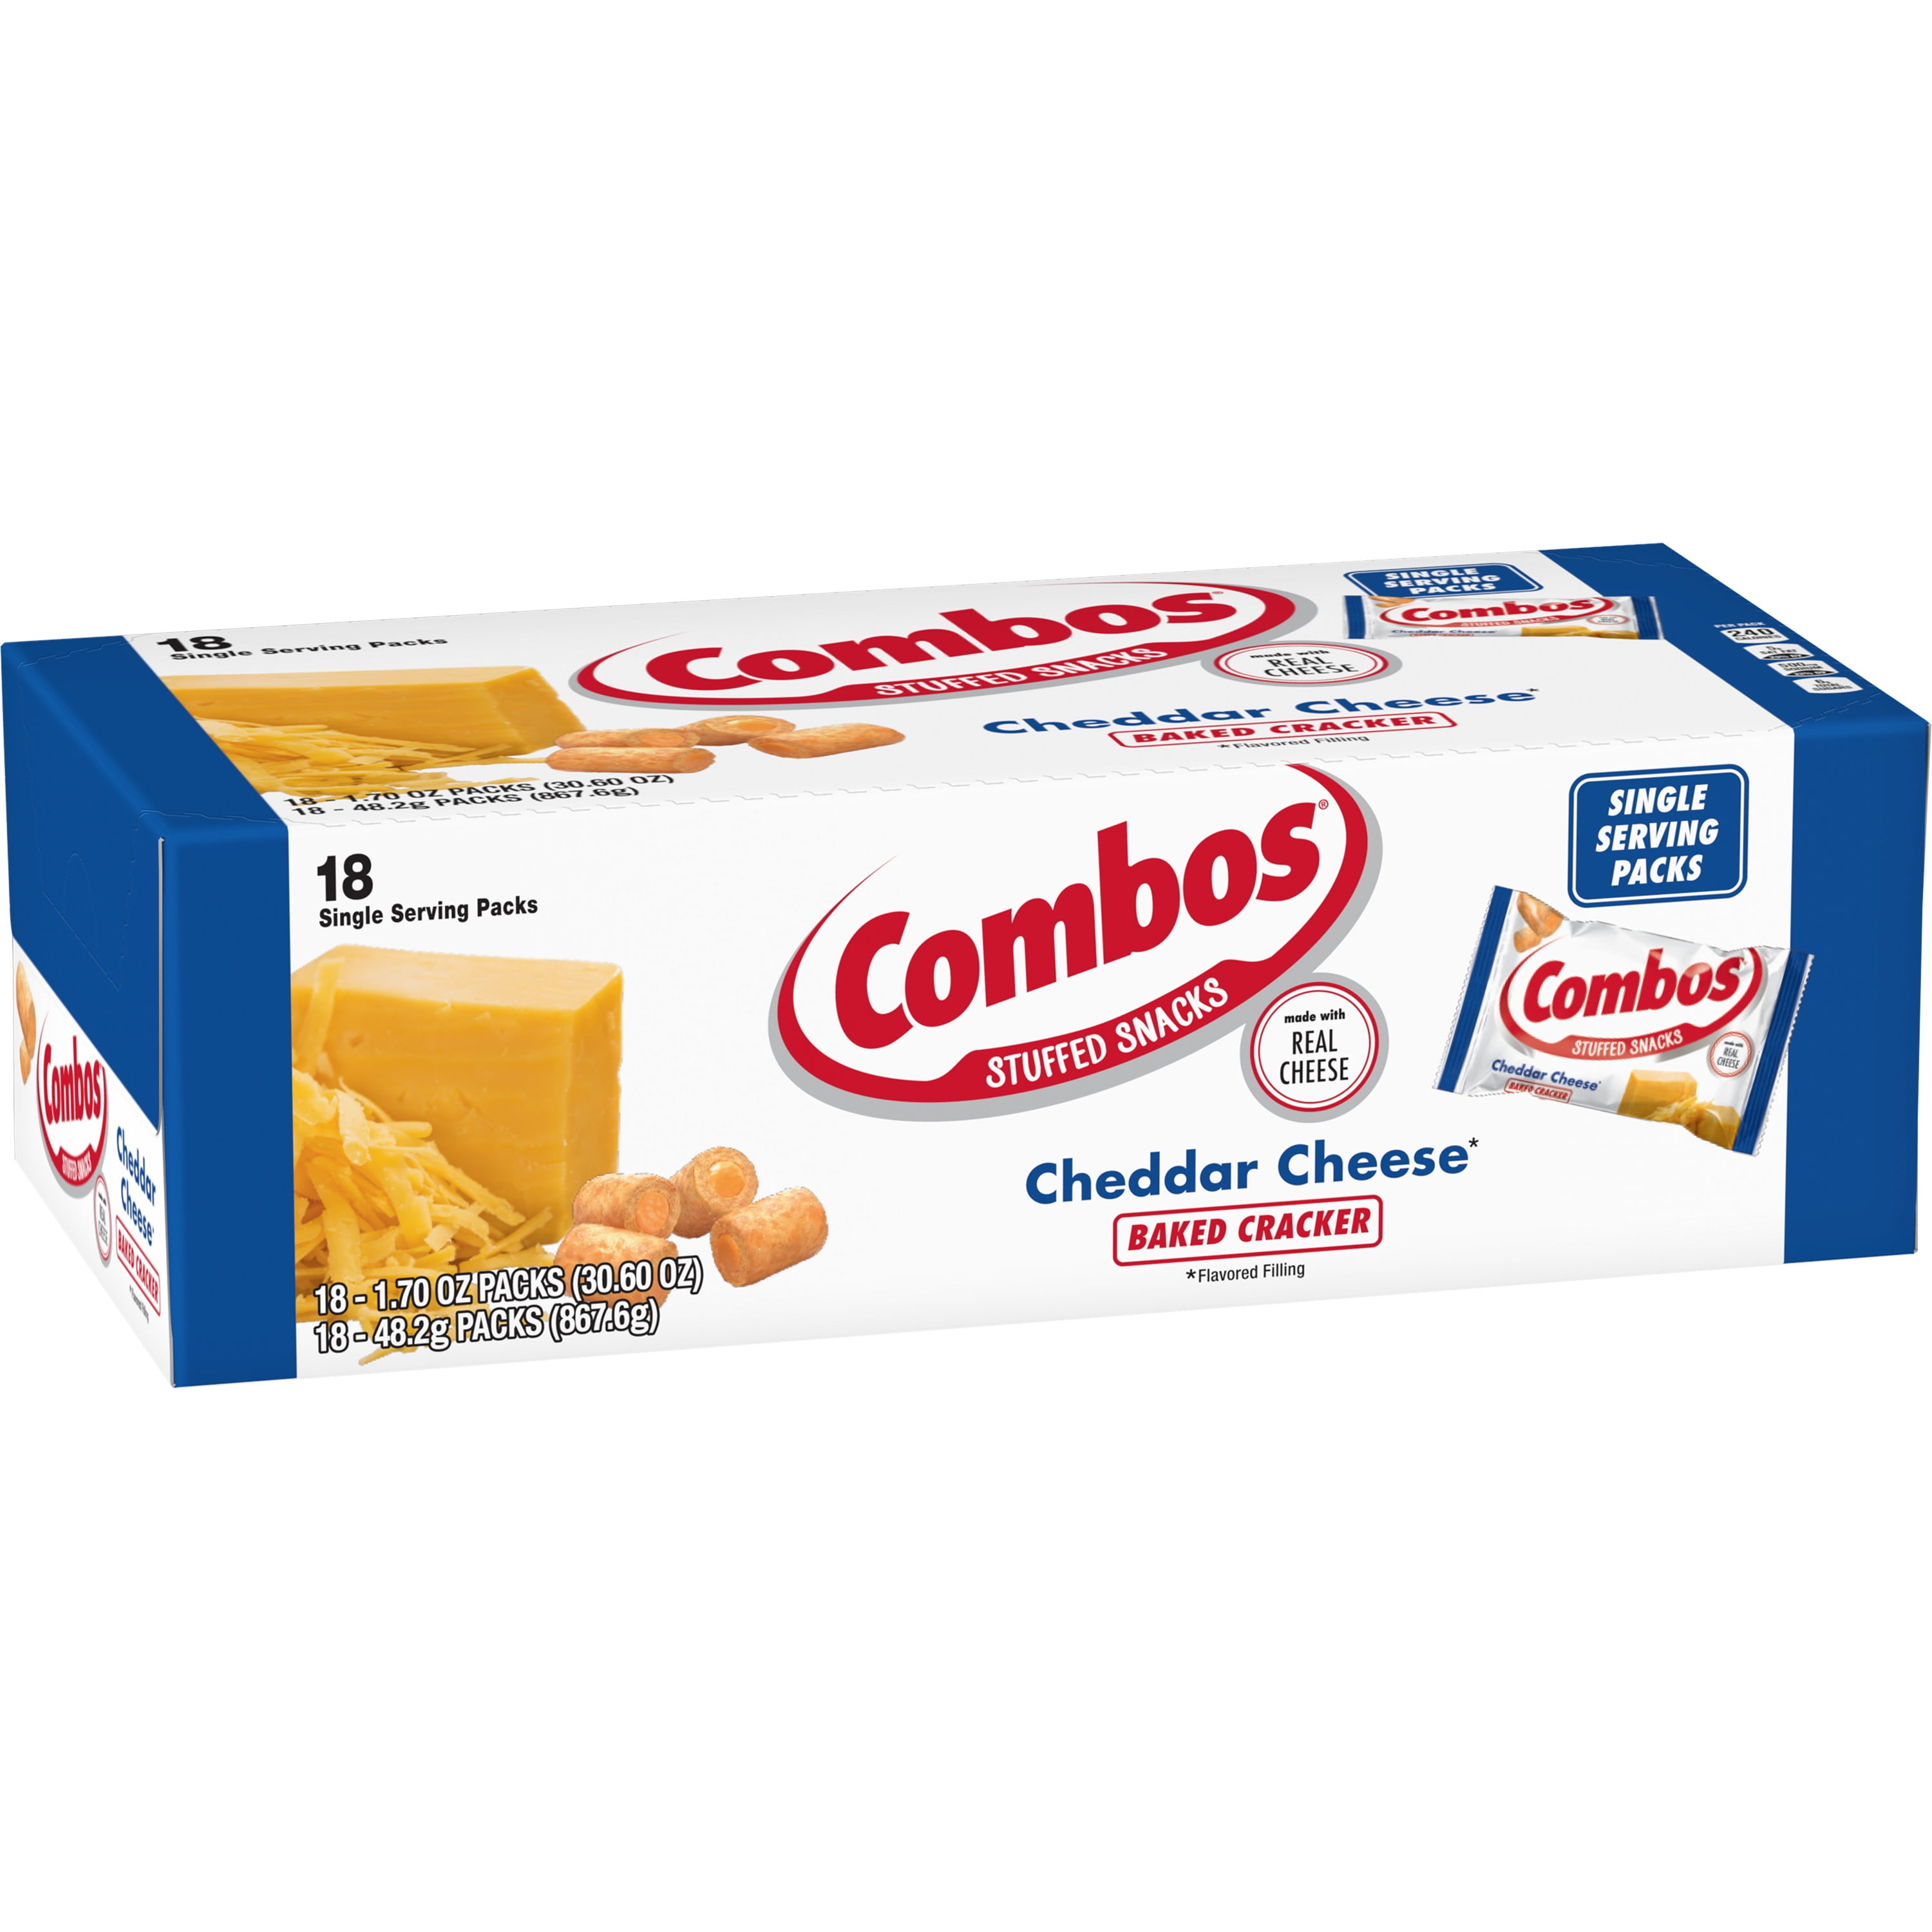 Combos Cheddar Cheese Cracker Baked Snacks, 1.8 Ounce Bags, 18